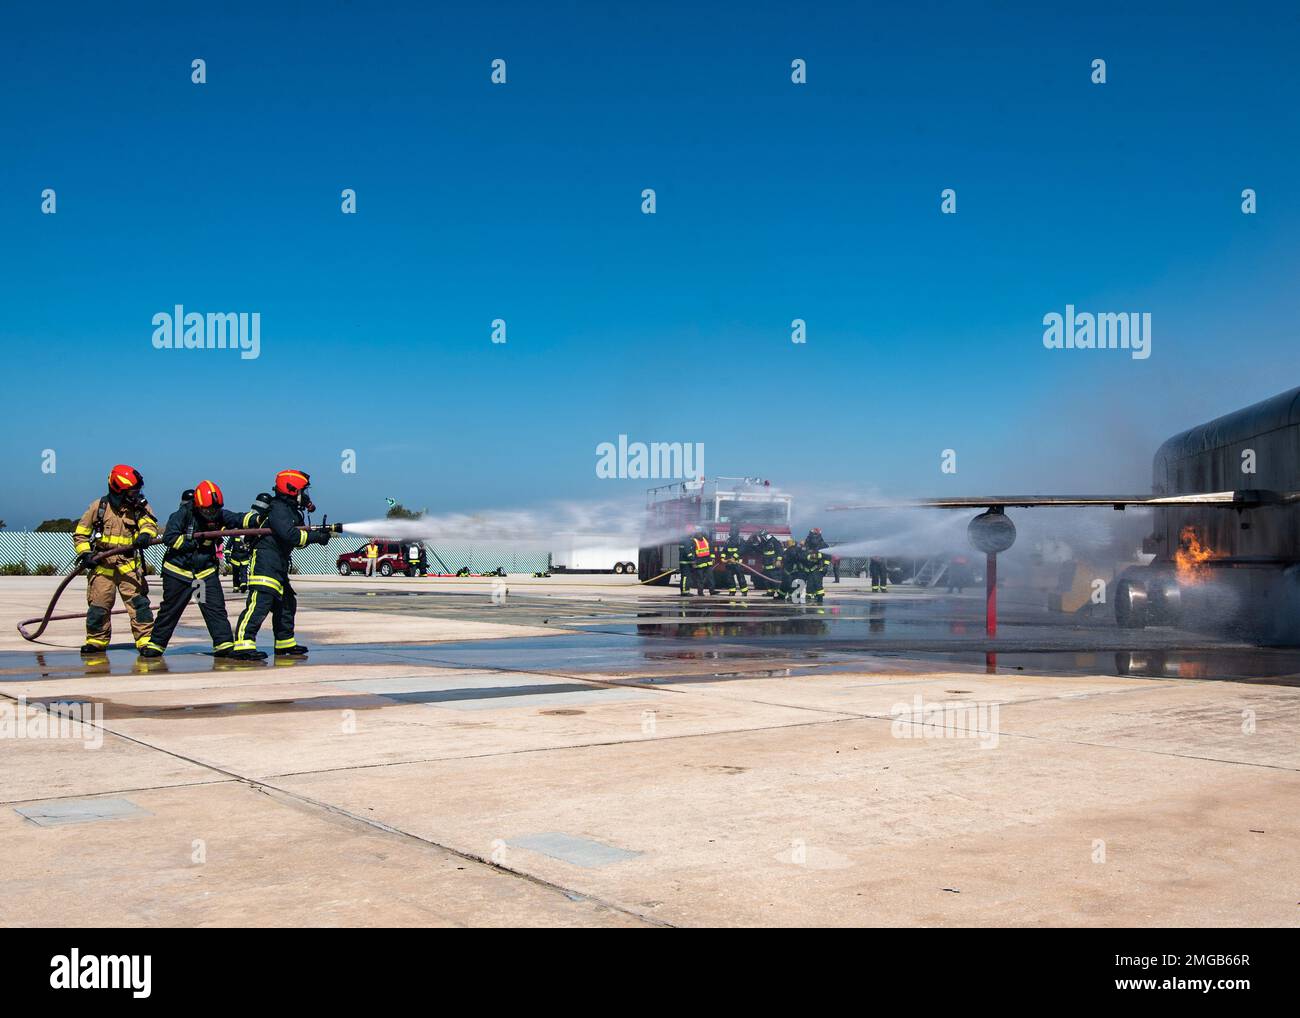 NAVAL STATION ROTA, Spain (Aug. 23, 2022) Naval Station (NAVSTA) Rota Fire and Emergency Services fight a fire from a simulated plane crash during a flight line emergency drill on NAVSTA Rota, Spain, Aug. 23, 2022. Naval Station Rota sustains the fleet, enables the fighter and supports the family by conducting air operations, port operations, ensuring security and safety, assuring quality of life and providing the core services of power, water, fuel and information technology. Stock Photo